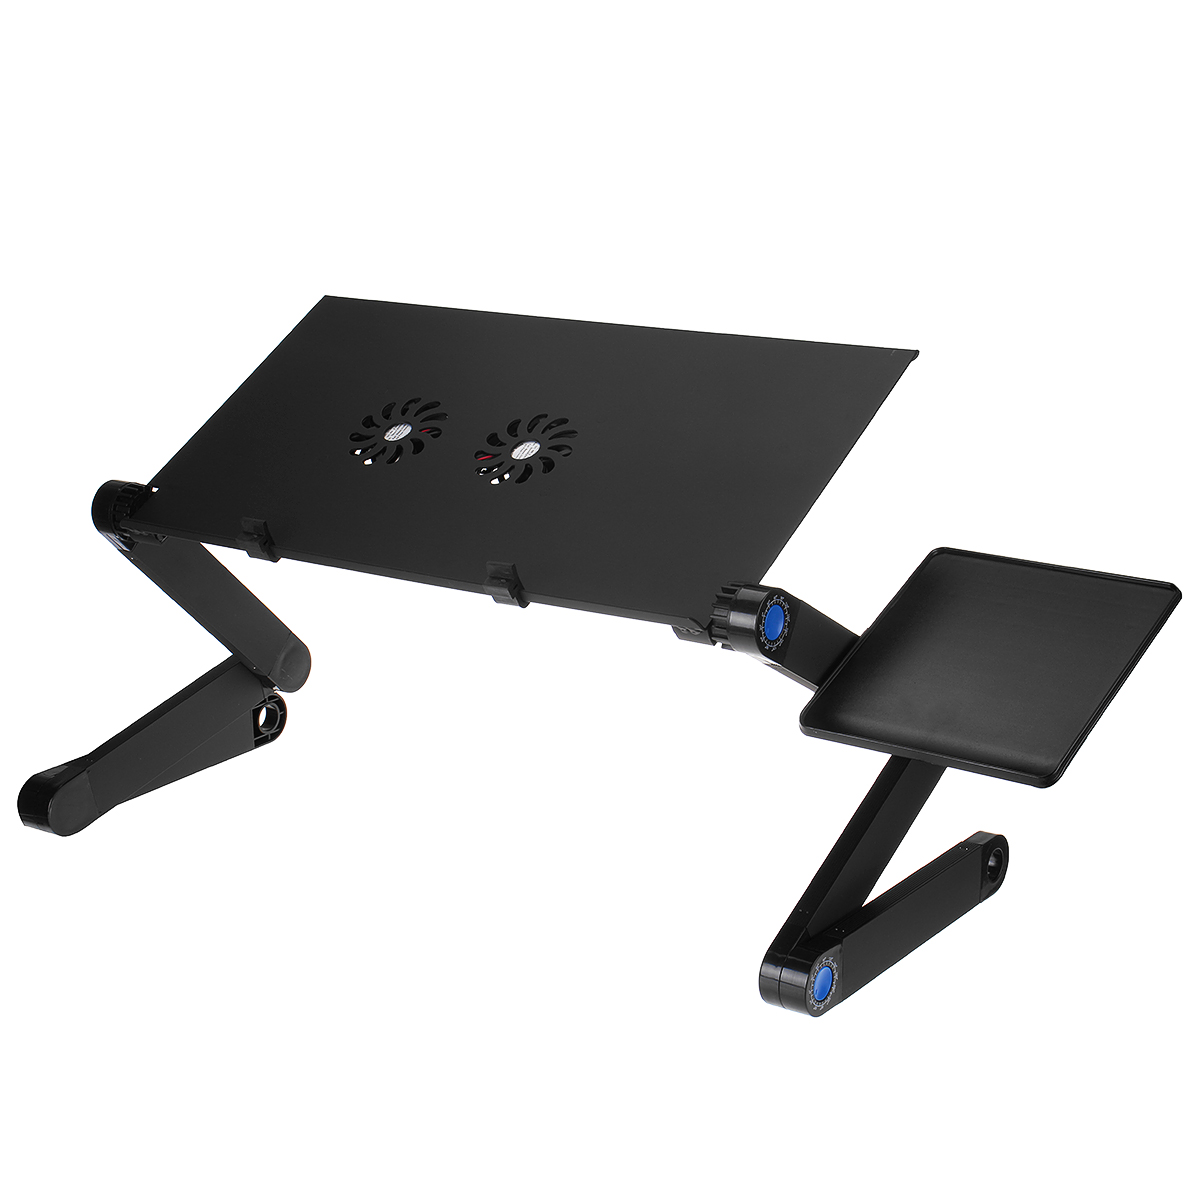 Cooling-Laptop-Desk-360-Degree-Aluminum-Alloy-Adjustable-Foldable-Cooling-Notebook-Table-for-Sofa-Be-1786133-13